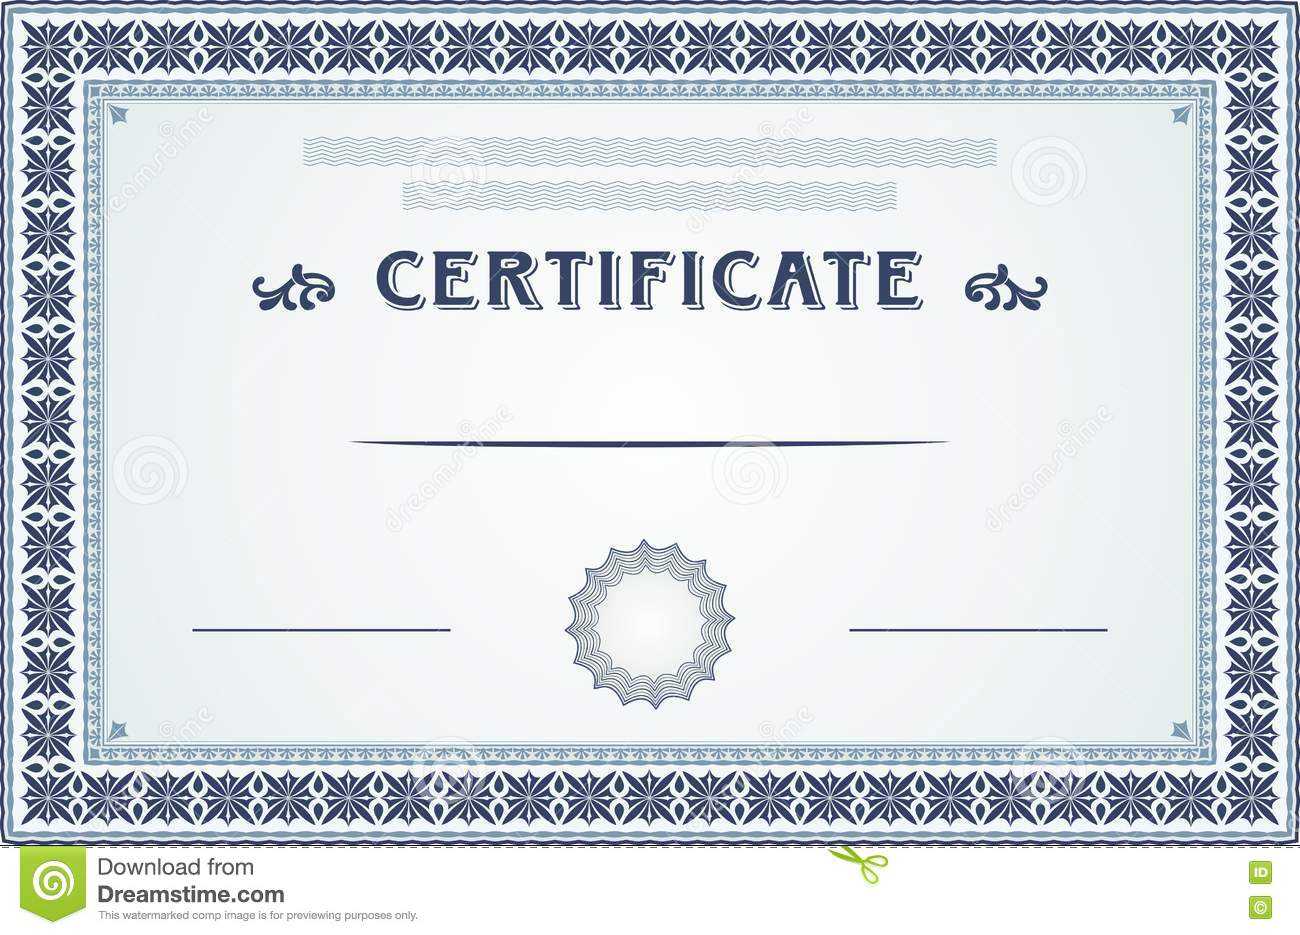 Certificate Border And Template Design Stock Vector Intended For Certificate Border Design Templates